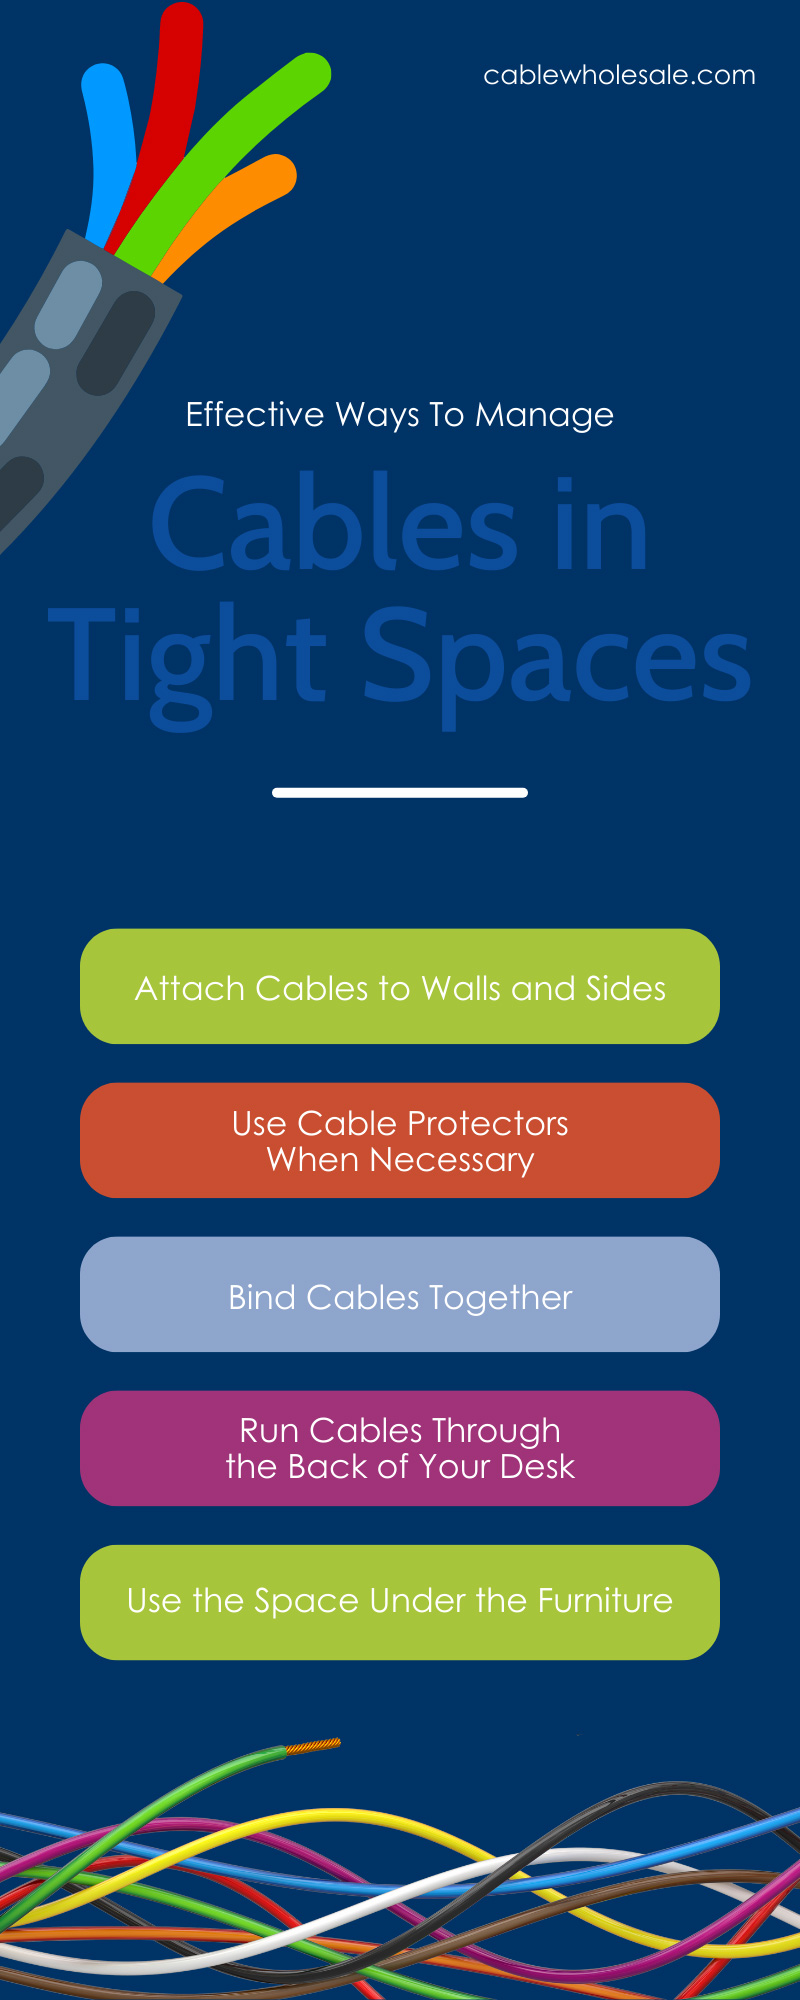 Effective Ways To Manage Cables in Tight Spaces